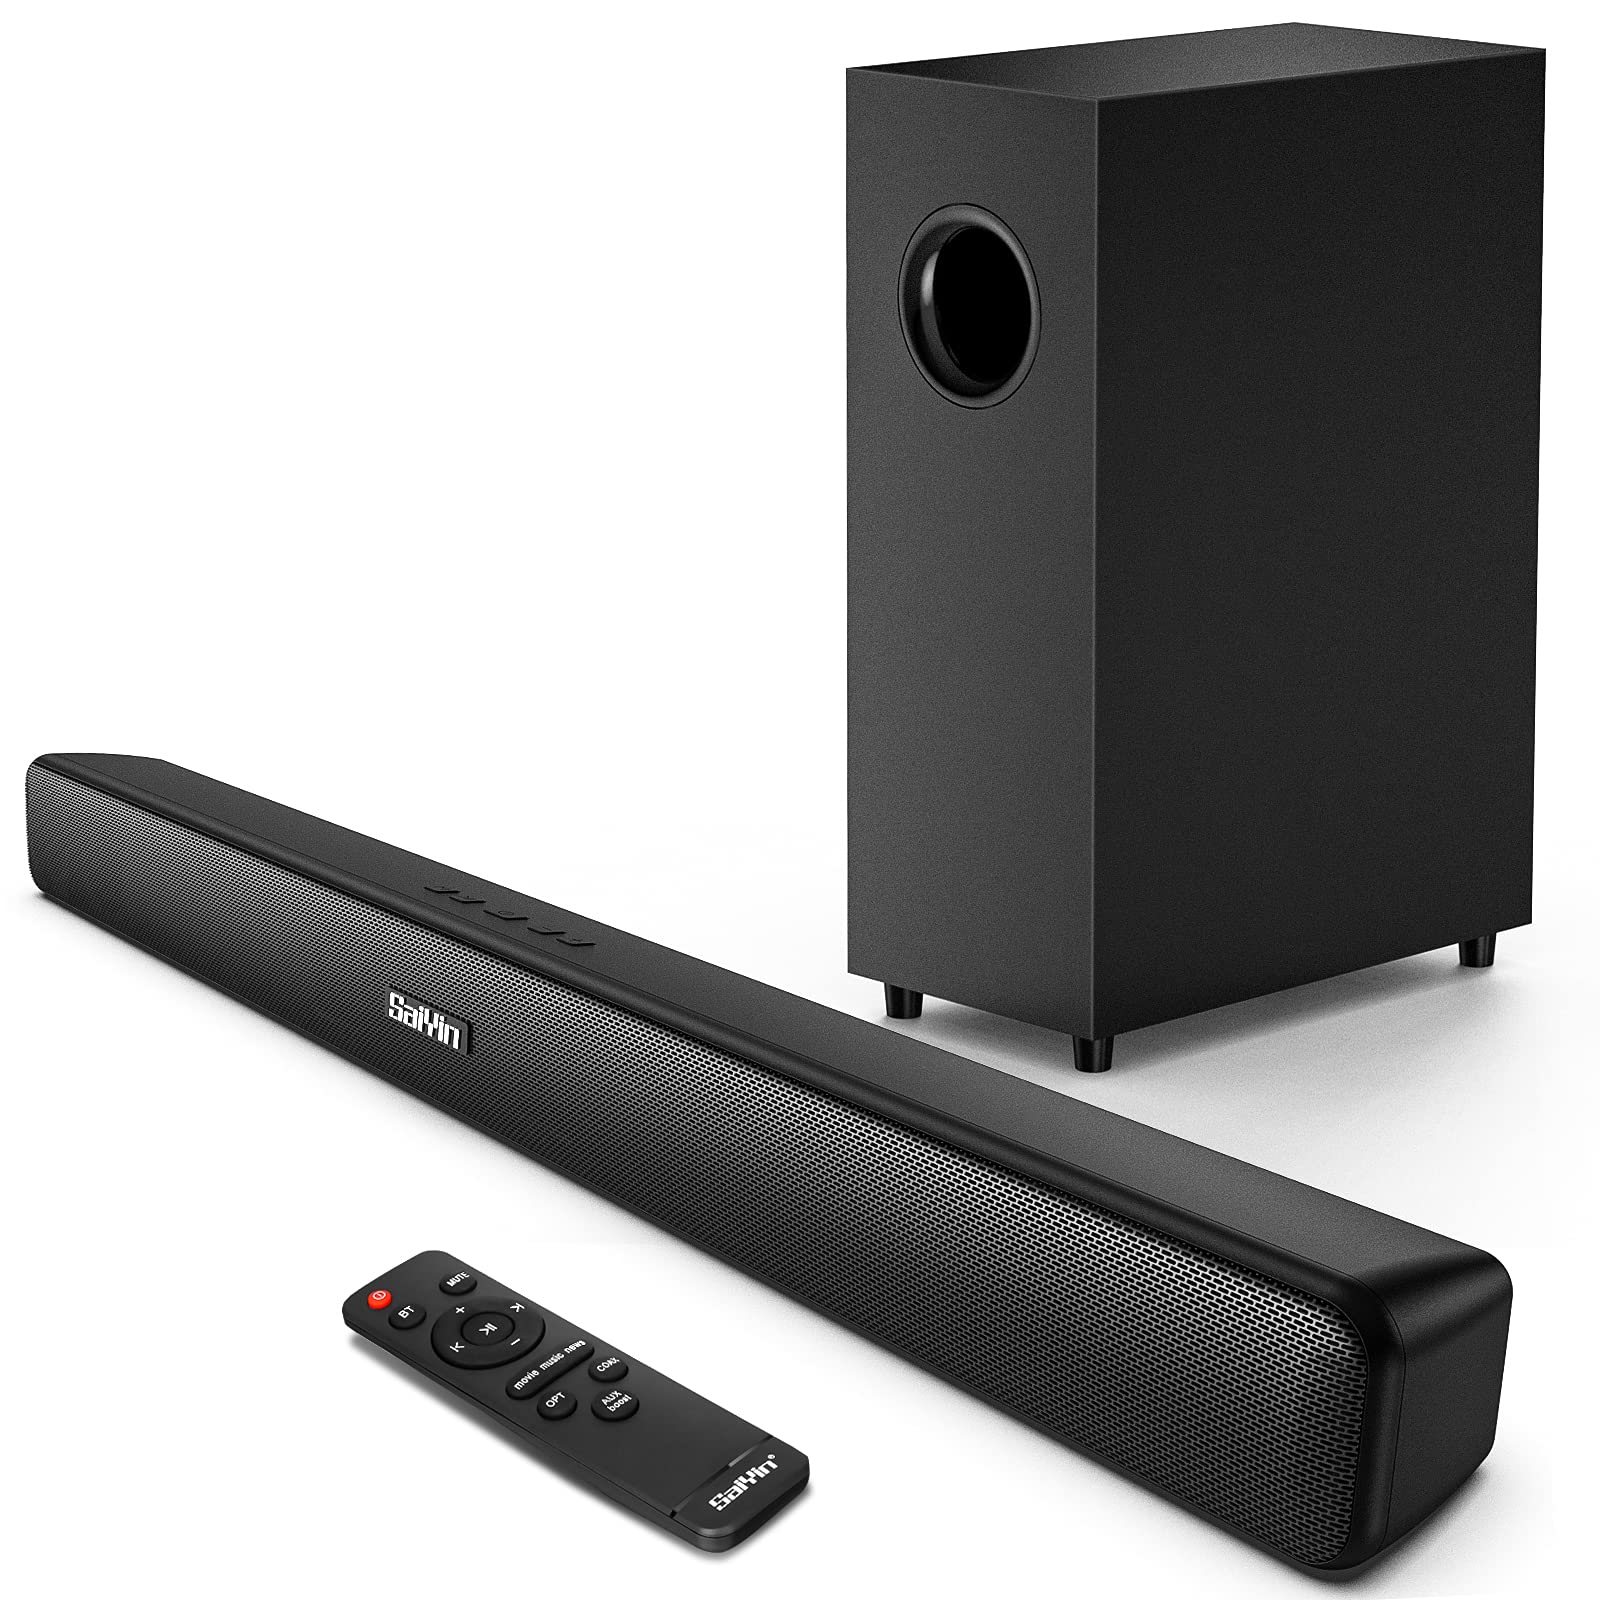 TV Sound Bar with Subwoofer, Saiyin Sound Bars for TV Ultra Slim 29 Inch Wired & Wireless Bluetooth 5.0 Connection, 2.1 Channel TV Speakers Surround Sound System